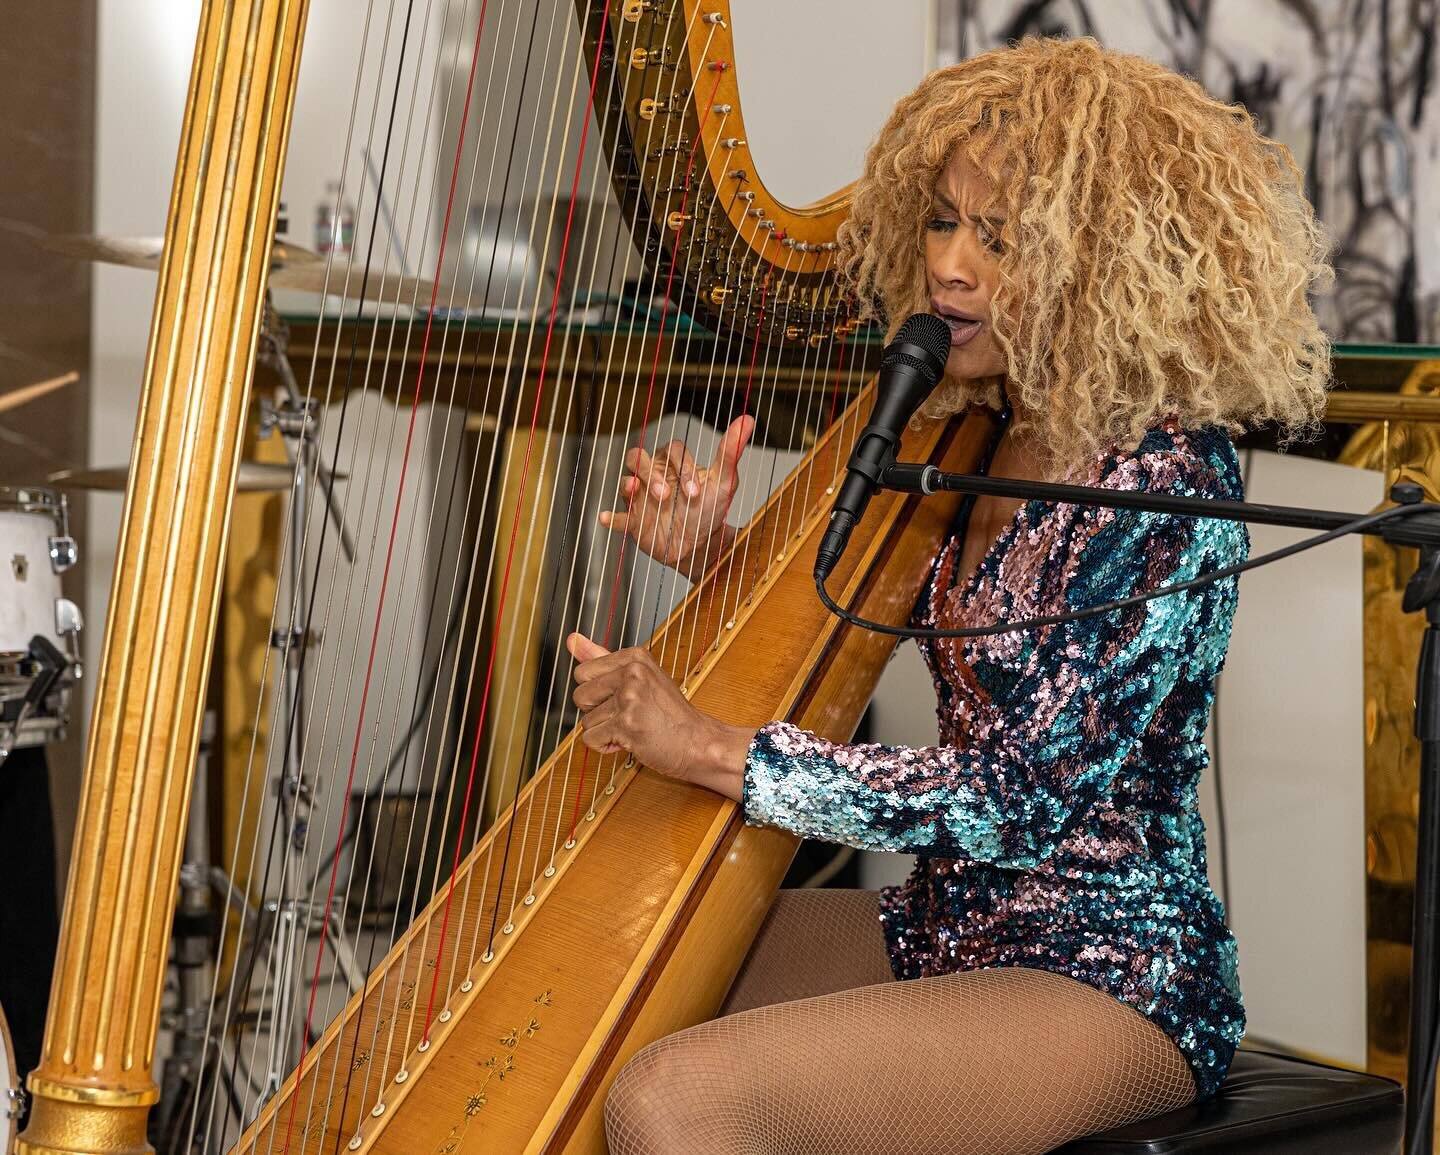 I had a wonderful time performing in LA for an amazing event, NOMOX Grammy Weekend Music and Tech Mixer. Thank you to @genoregist @vonsmith1 Rahul and Kate (NOMO Ventures) for having me! ❤️ 

#NOMOX #Tulani #Harpist #Singer #losangeles